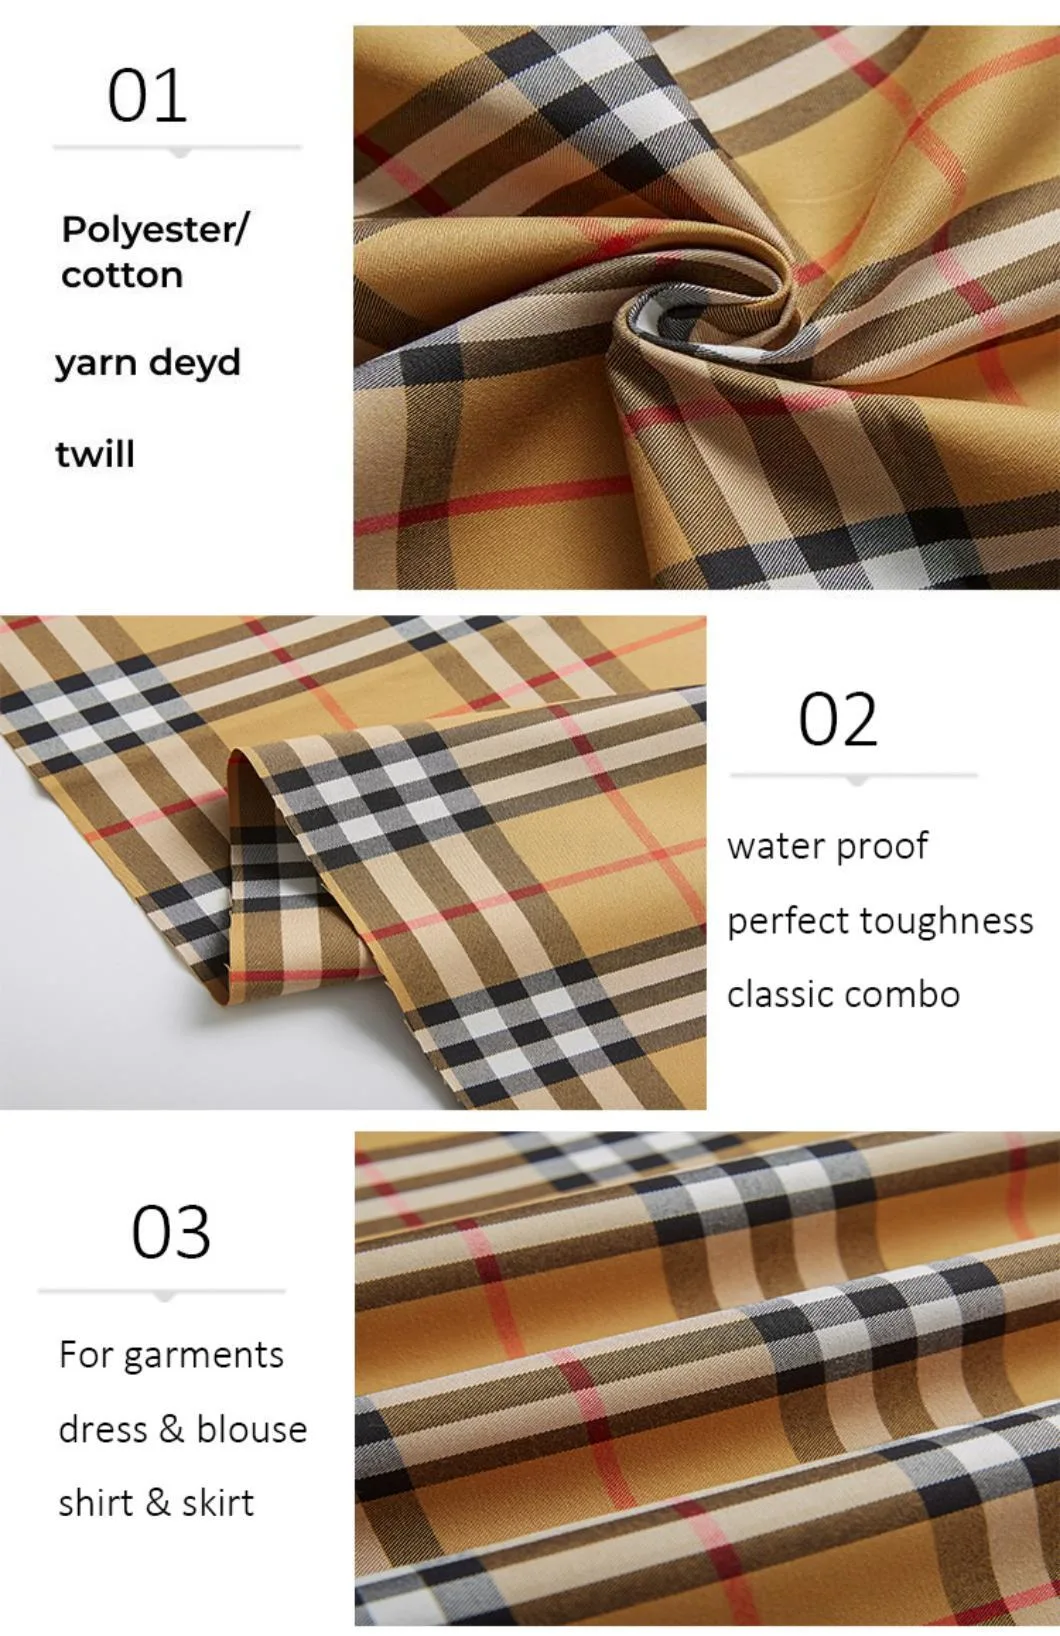 Wholesale Polyester Cotton Nylon Soft Hand Woven Spandex Twill Uniform Suit Plaid Yarn Dyed Fabric for Girls Stripe Shirt Skirt